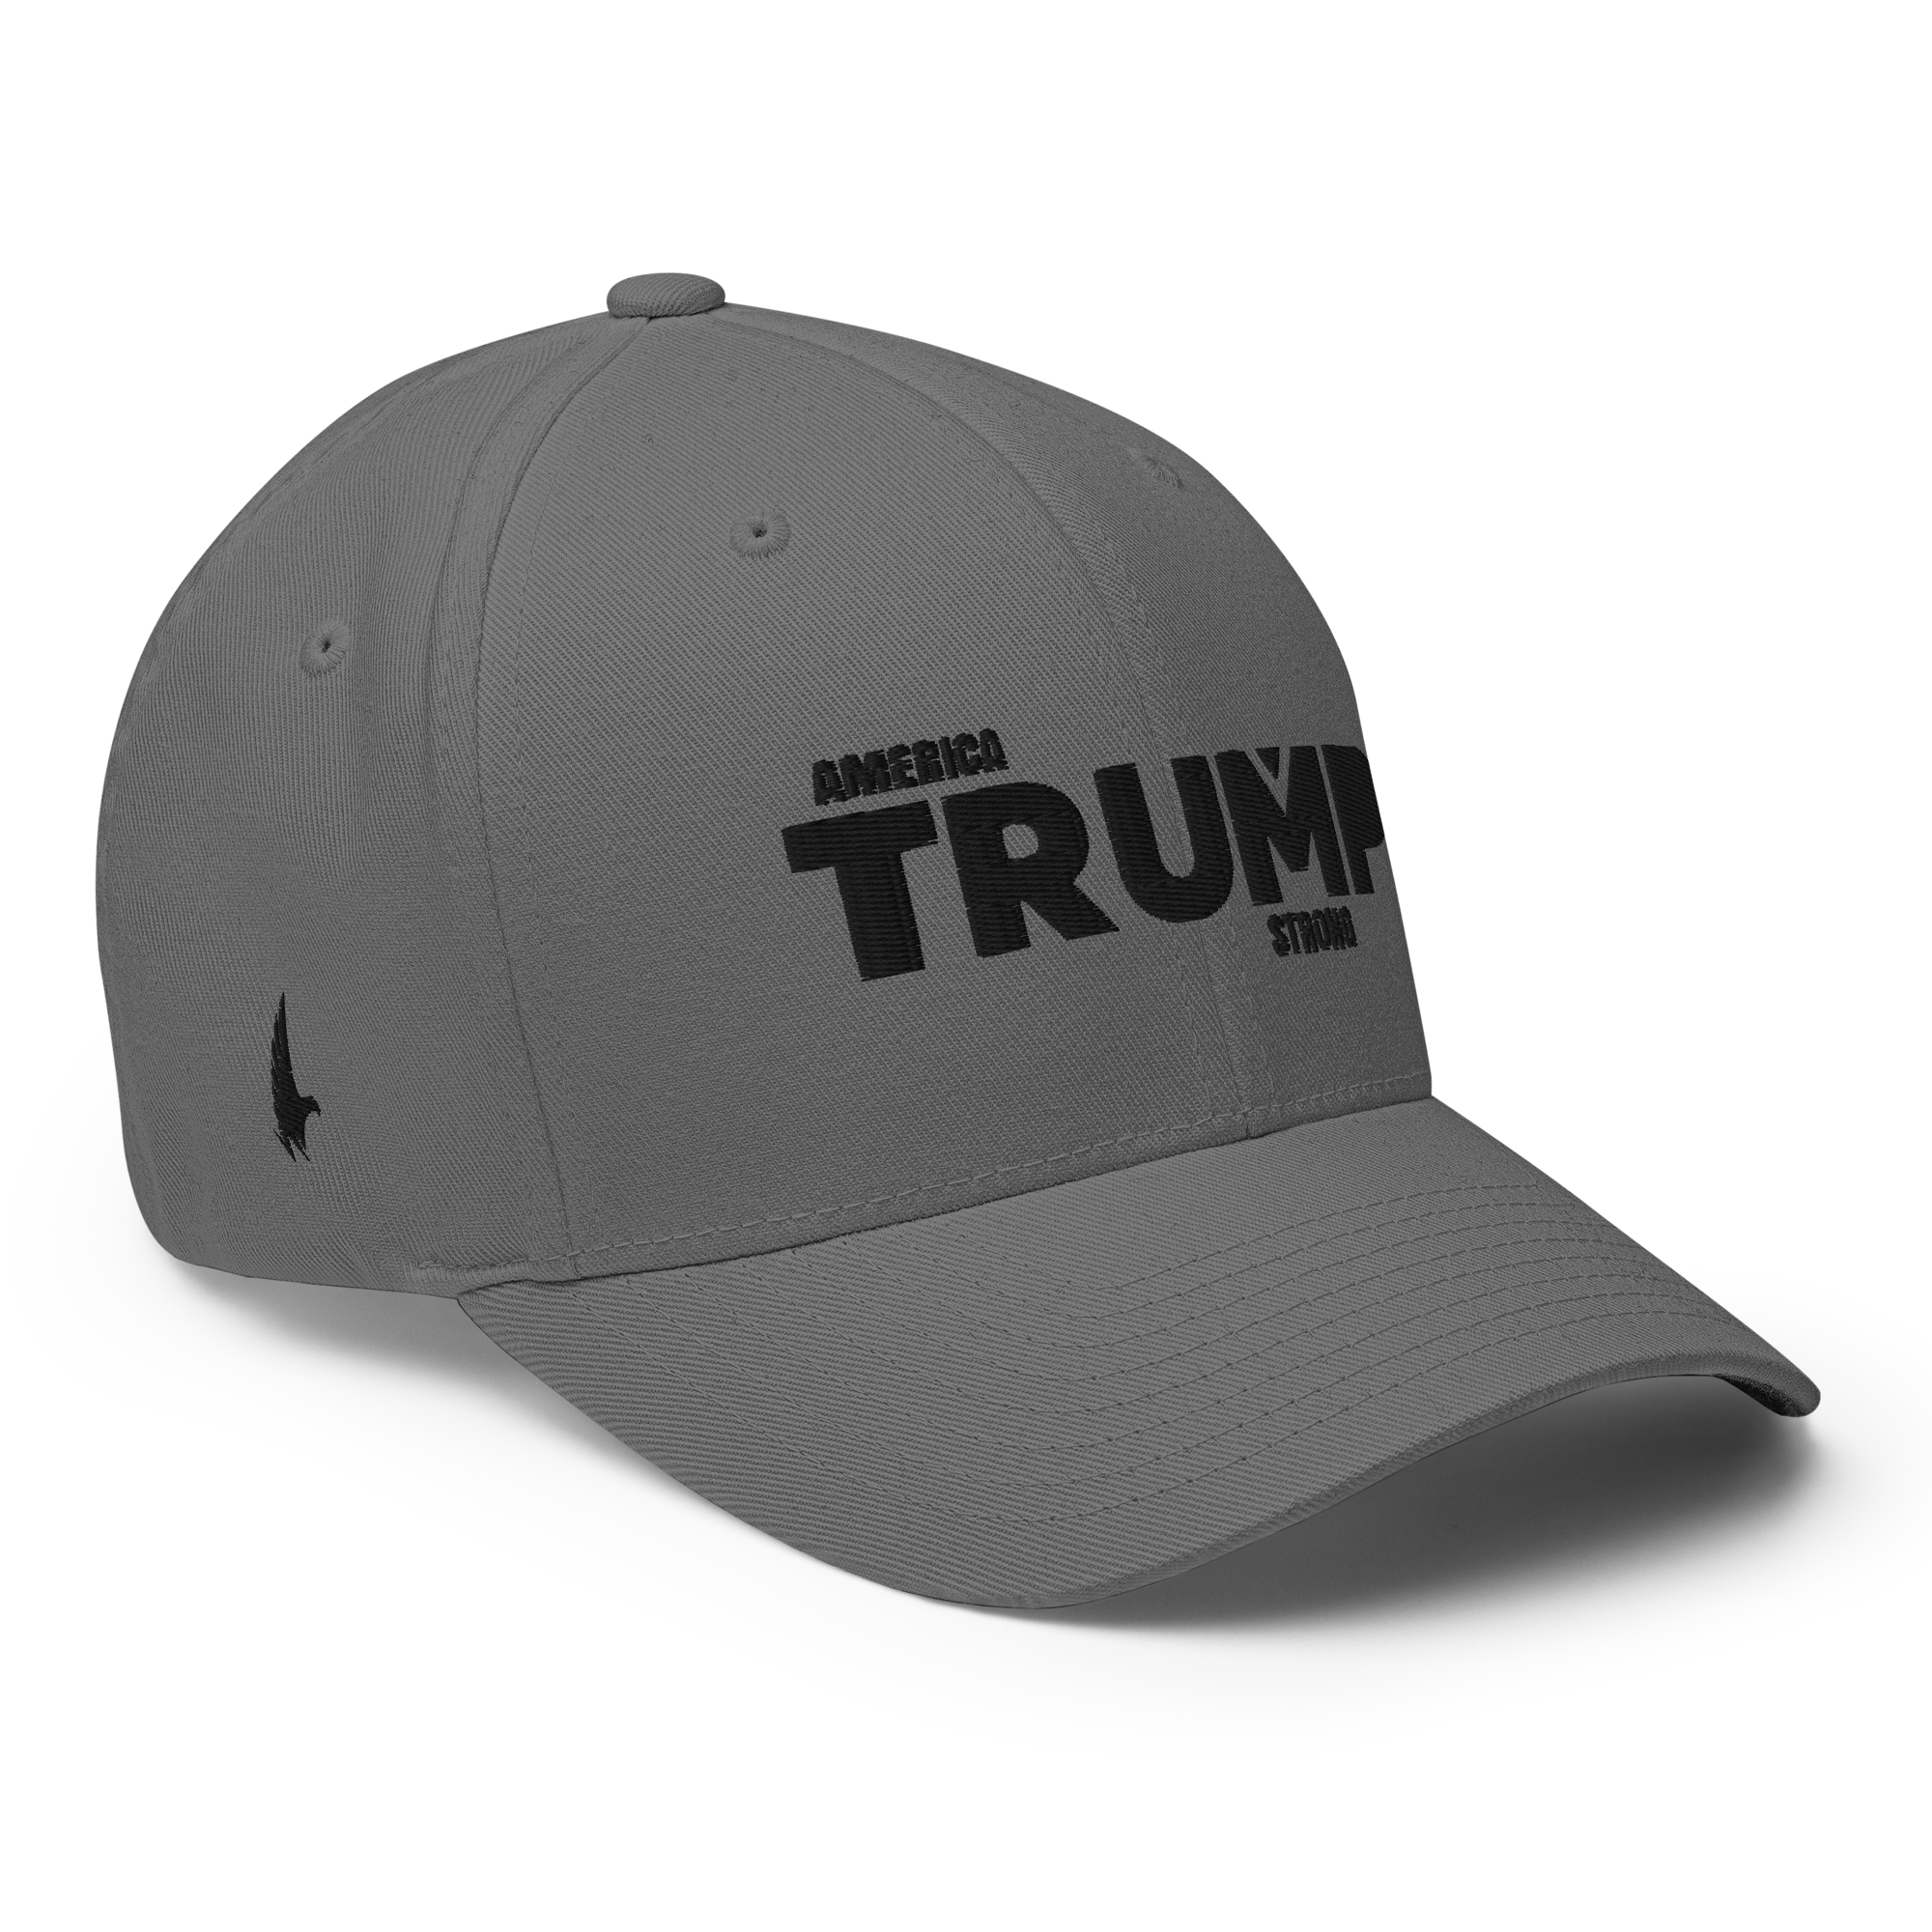 America Strong Trump Flexfit Hat Grey / Black Fitted - Loyalty Vibes